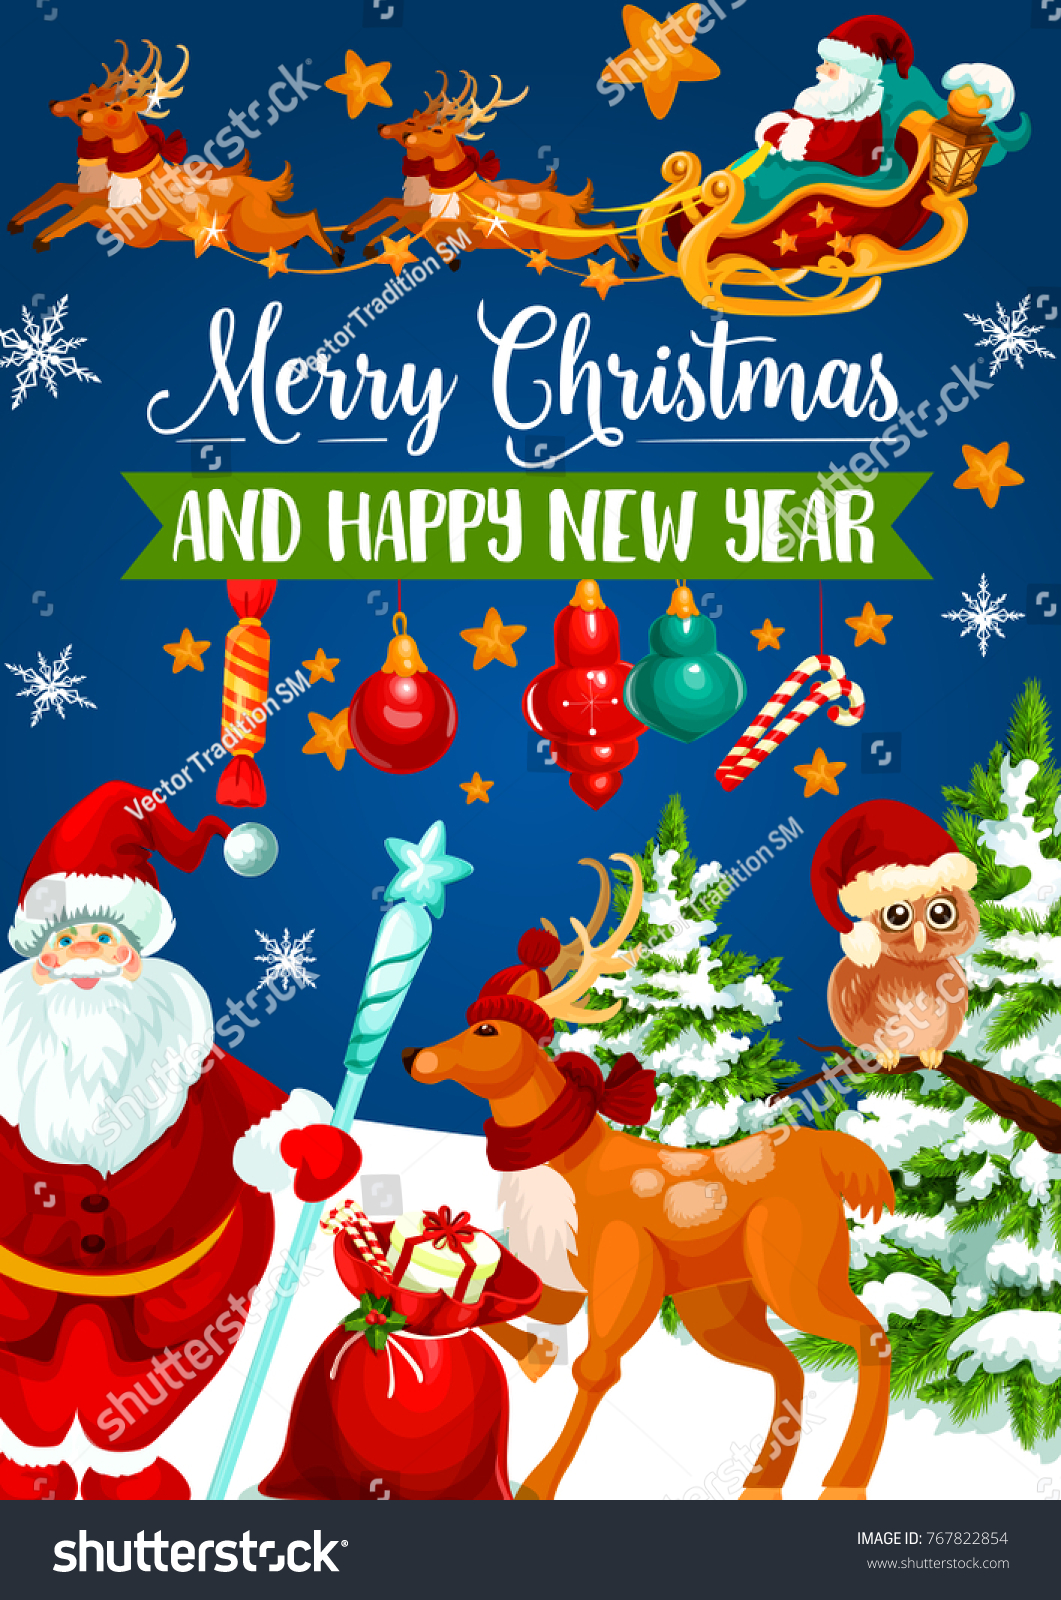 Christmas Santa sleigh with t greeting card for New Year winter holiday celebration Santa Claus